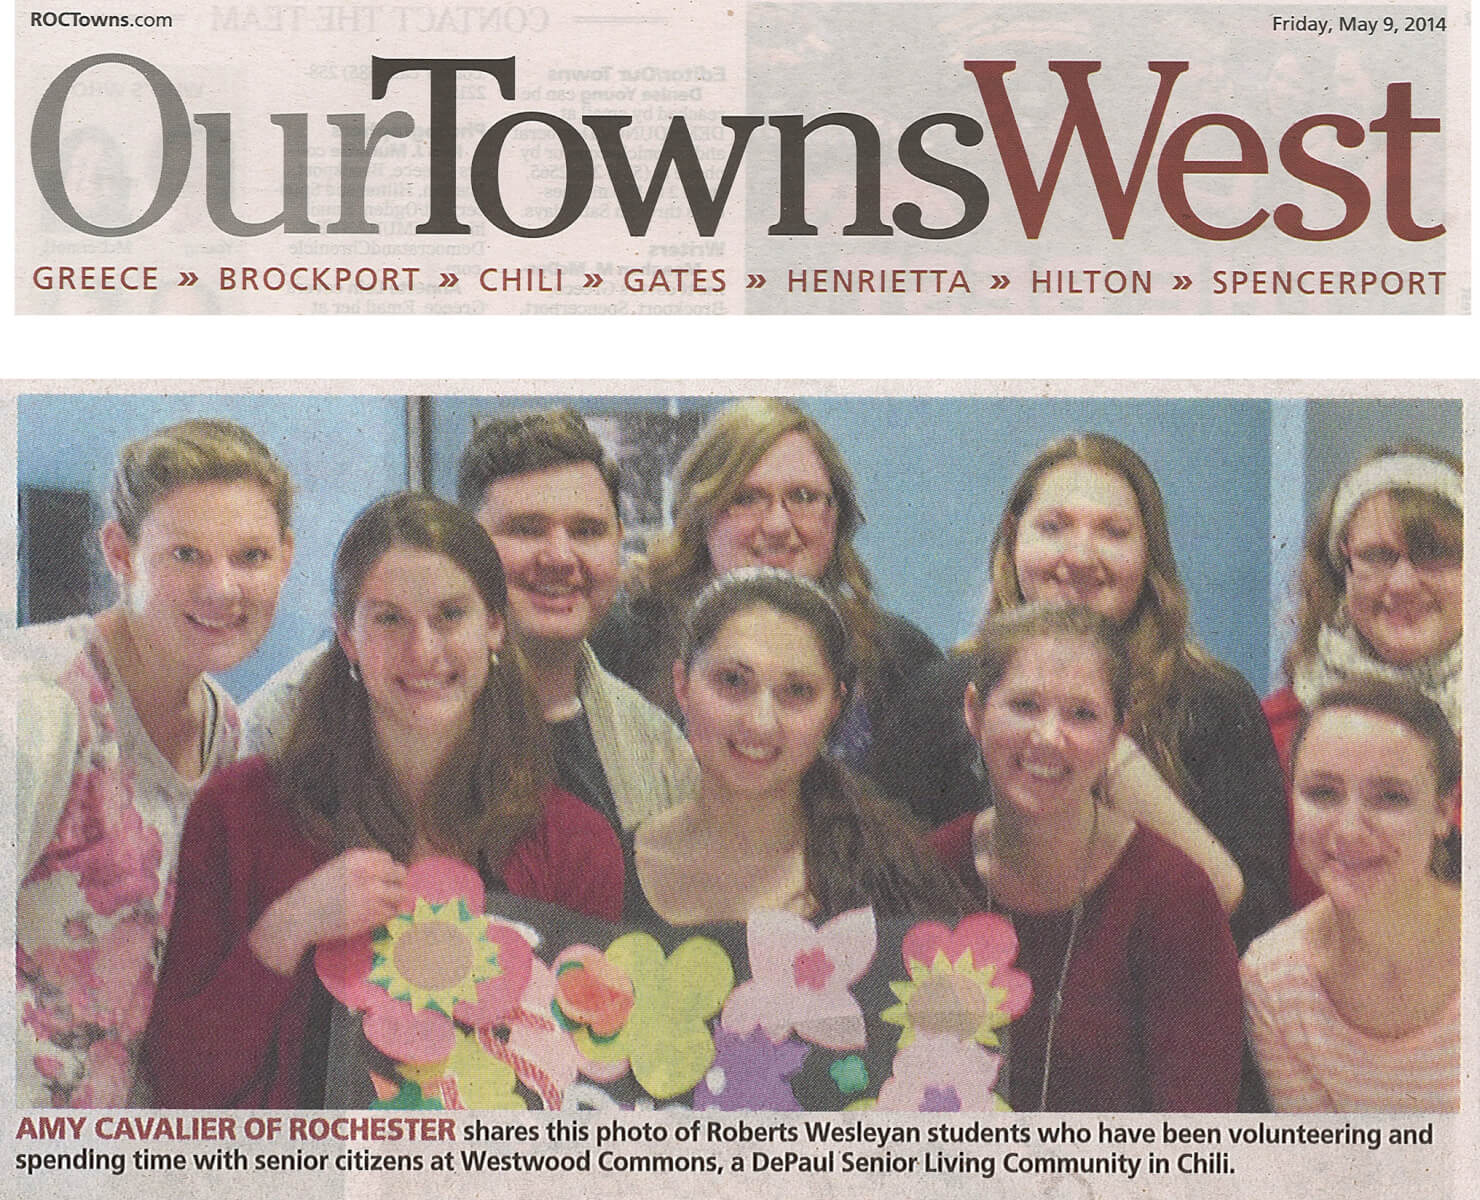 Westwood Commons Volunteer Recognition photo in the DC Our Towns West May 9, 2014